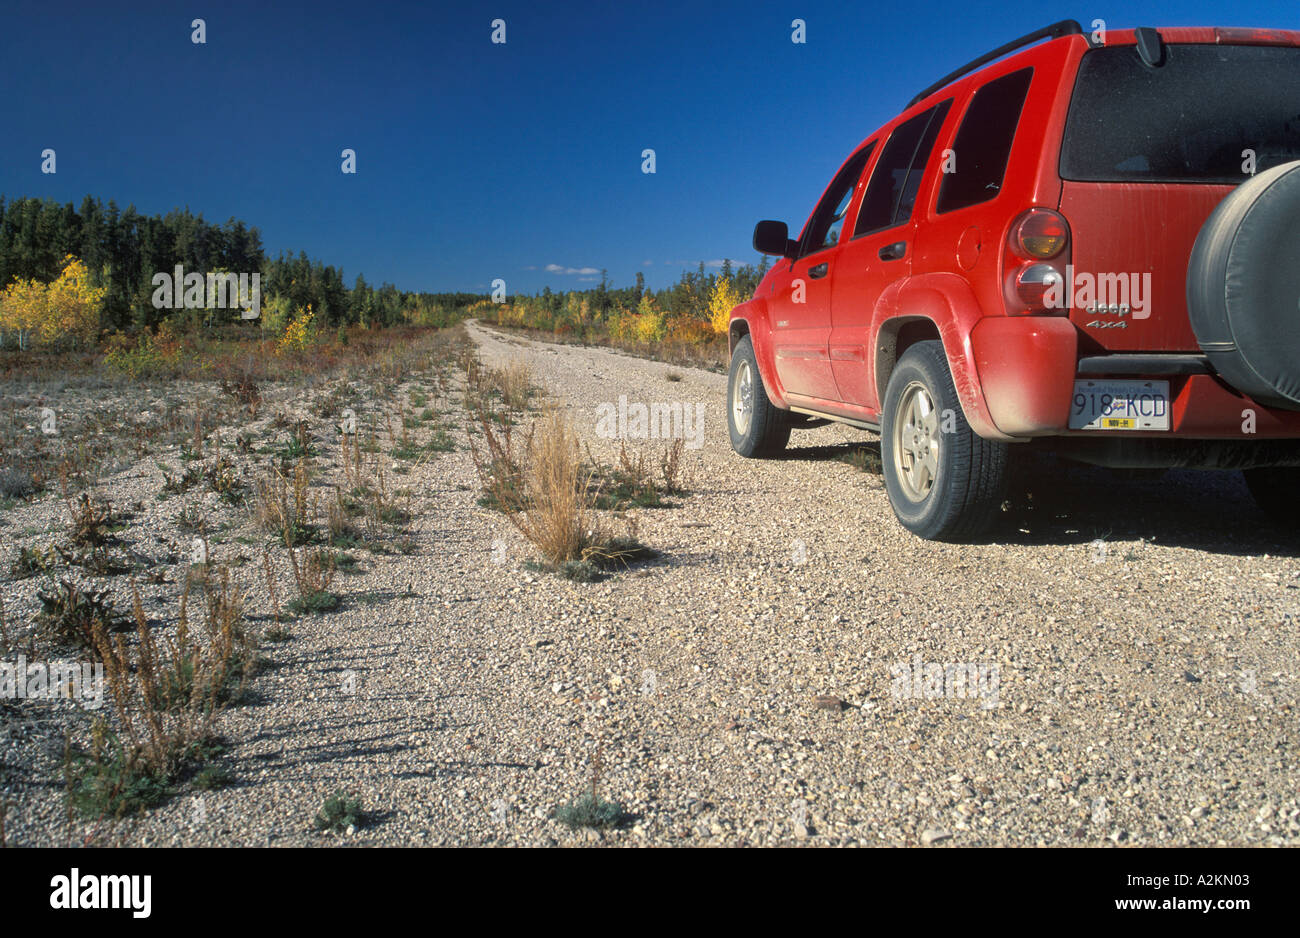 red car driving on a dirt road Stock Photo